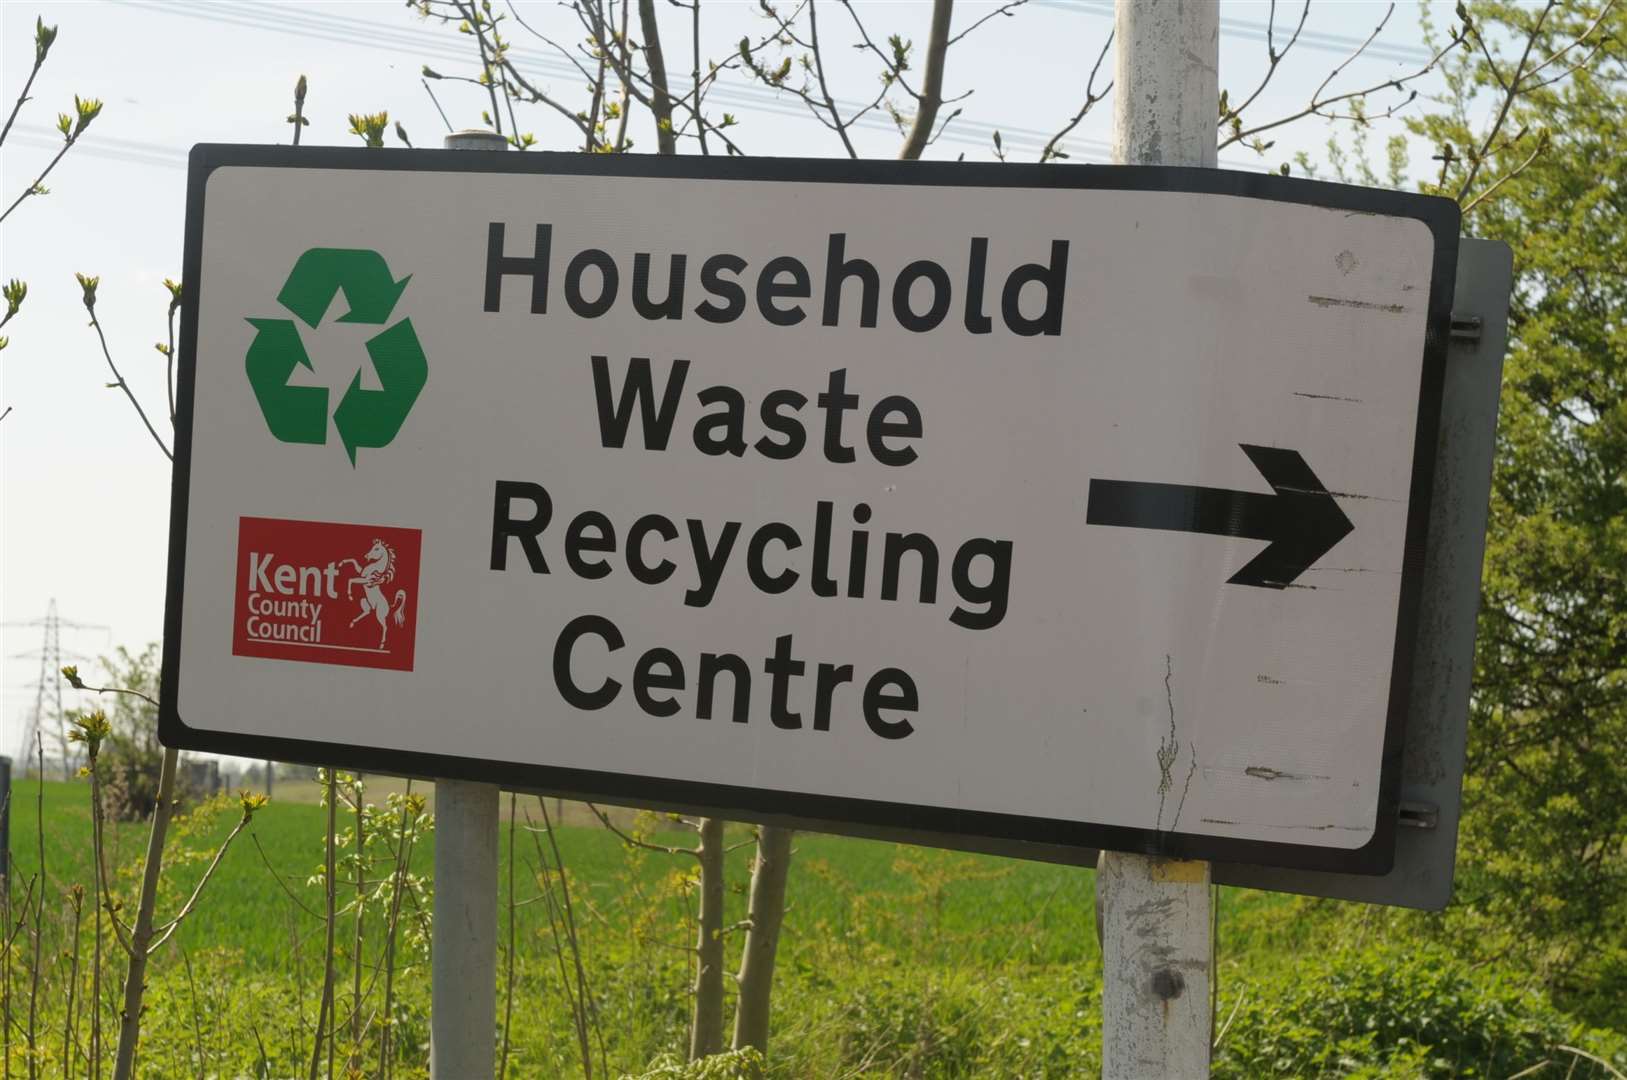 The new recycling centre is on the 20/20 business park